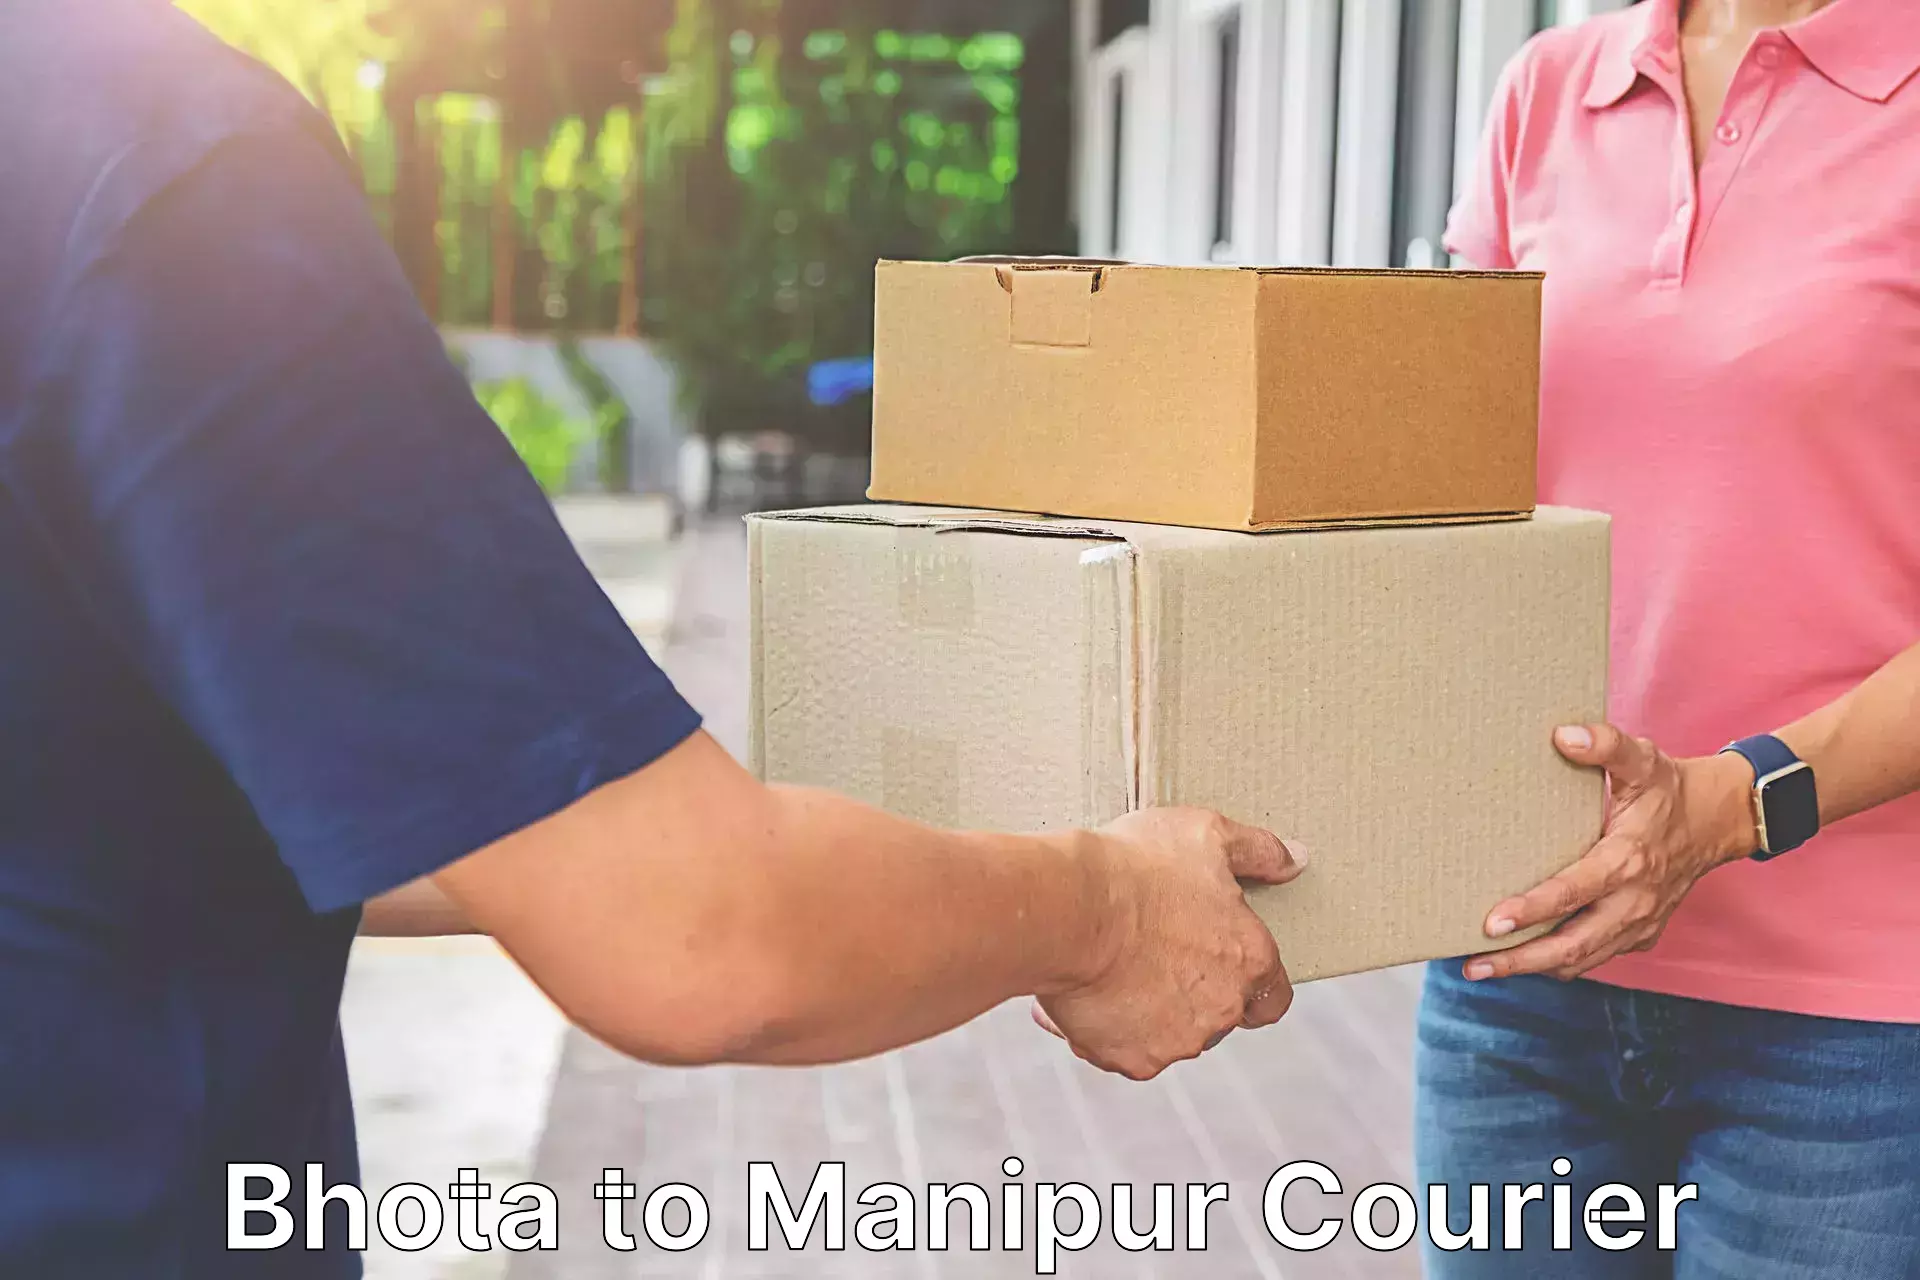 Courier service partnerships Bhota to Manipur